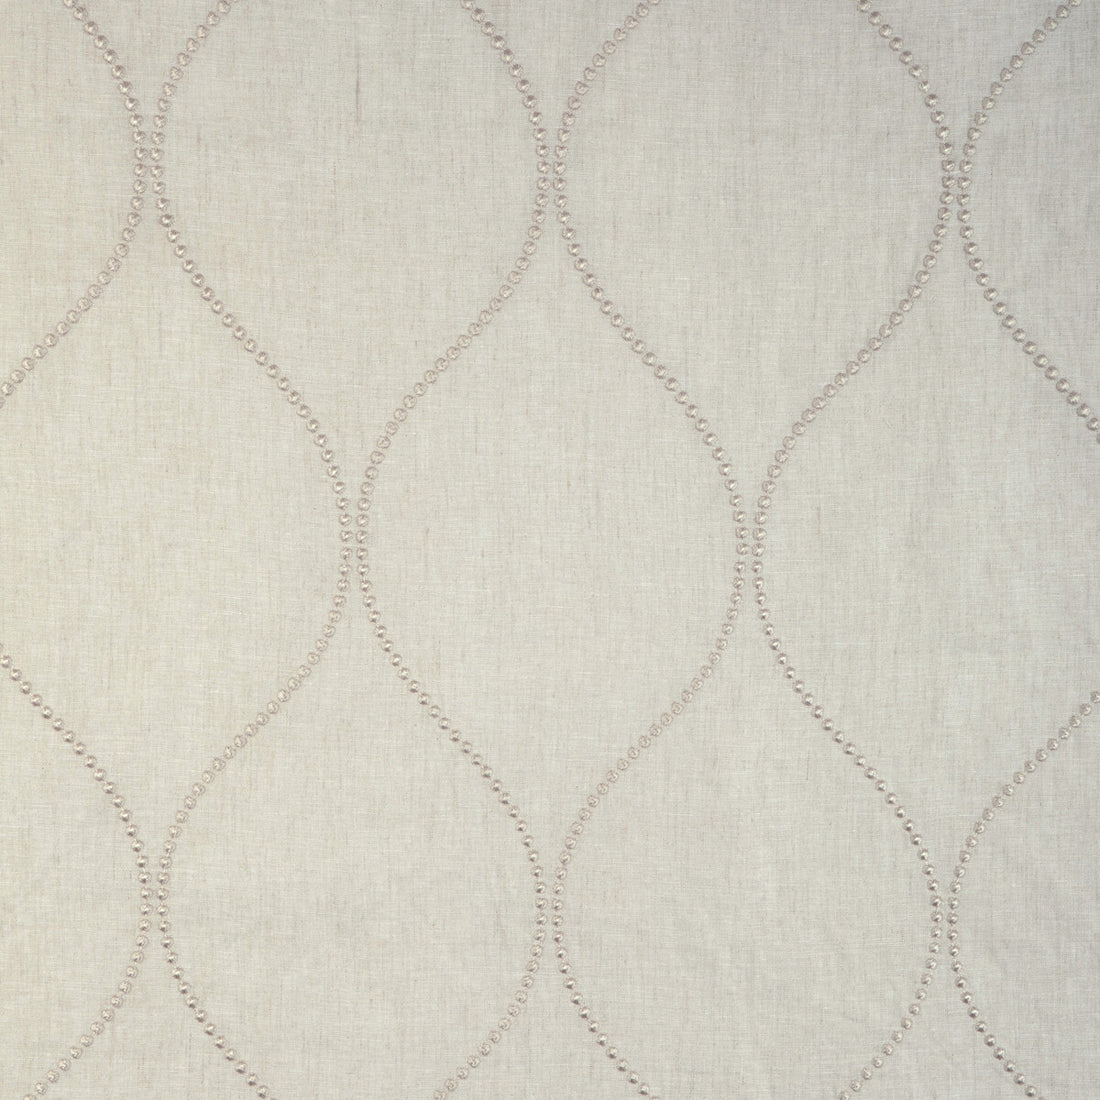 Kravet Design fabric in 4004-106 color - pattern 4004.106.0 - by Kravet Design in the Candice Olson collection